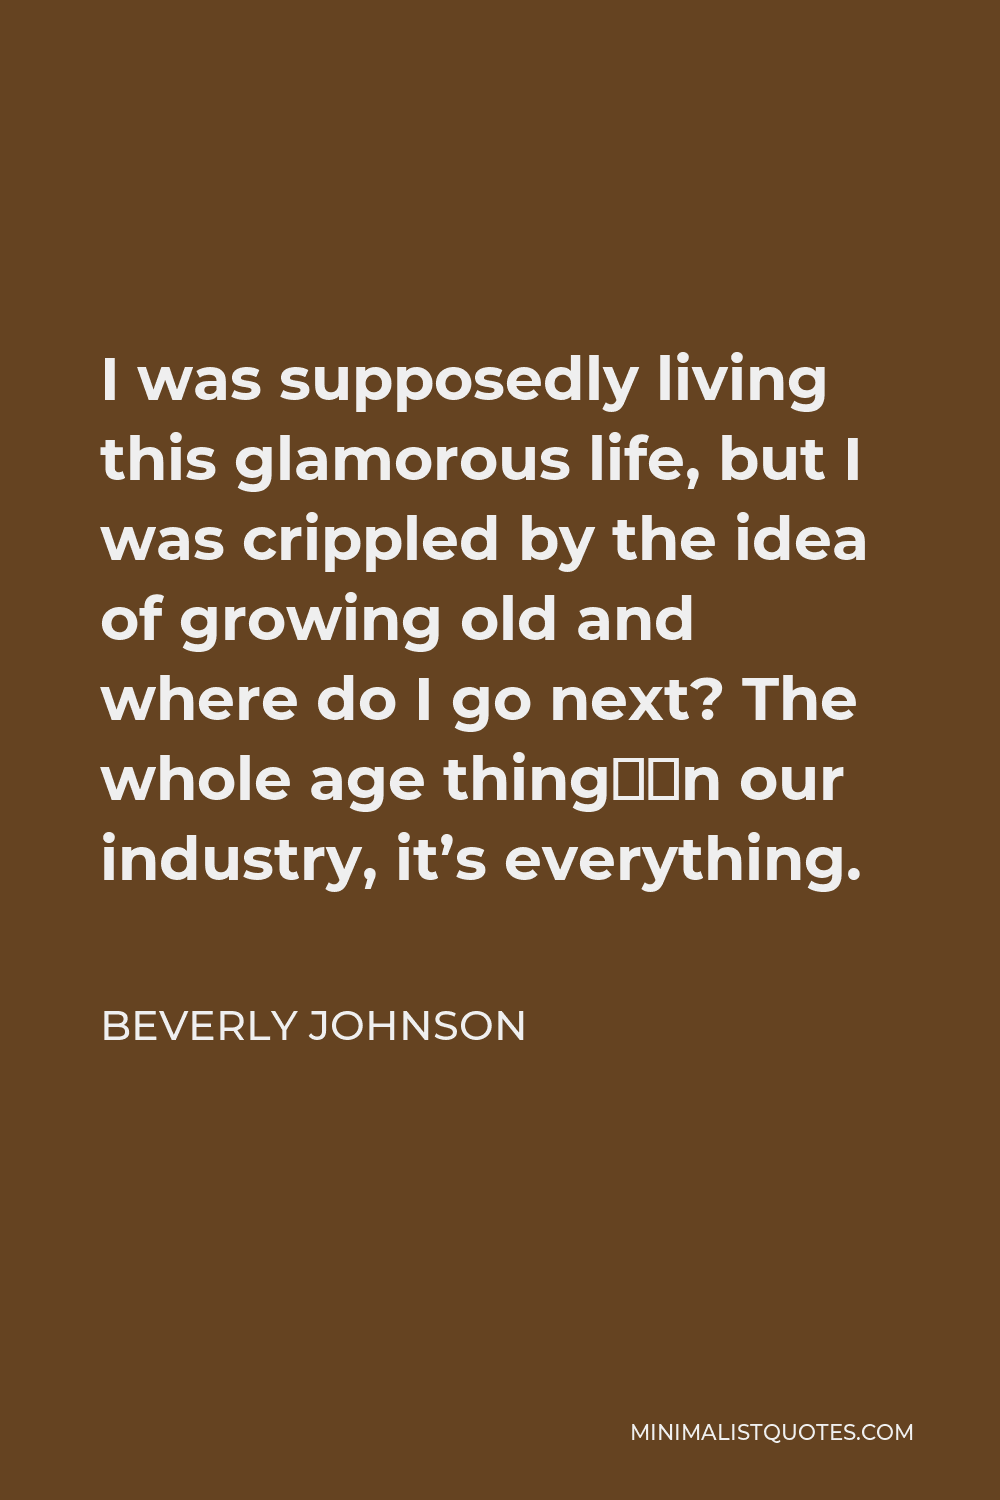 Beverly Johnson Quote - I was supposedly living this glamorous life, but I was crippled by the idea of growing old and where do I go next? The whole age thing—in our industry, it’s everything.